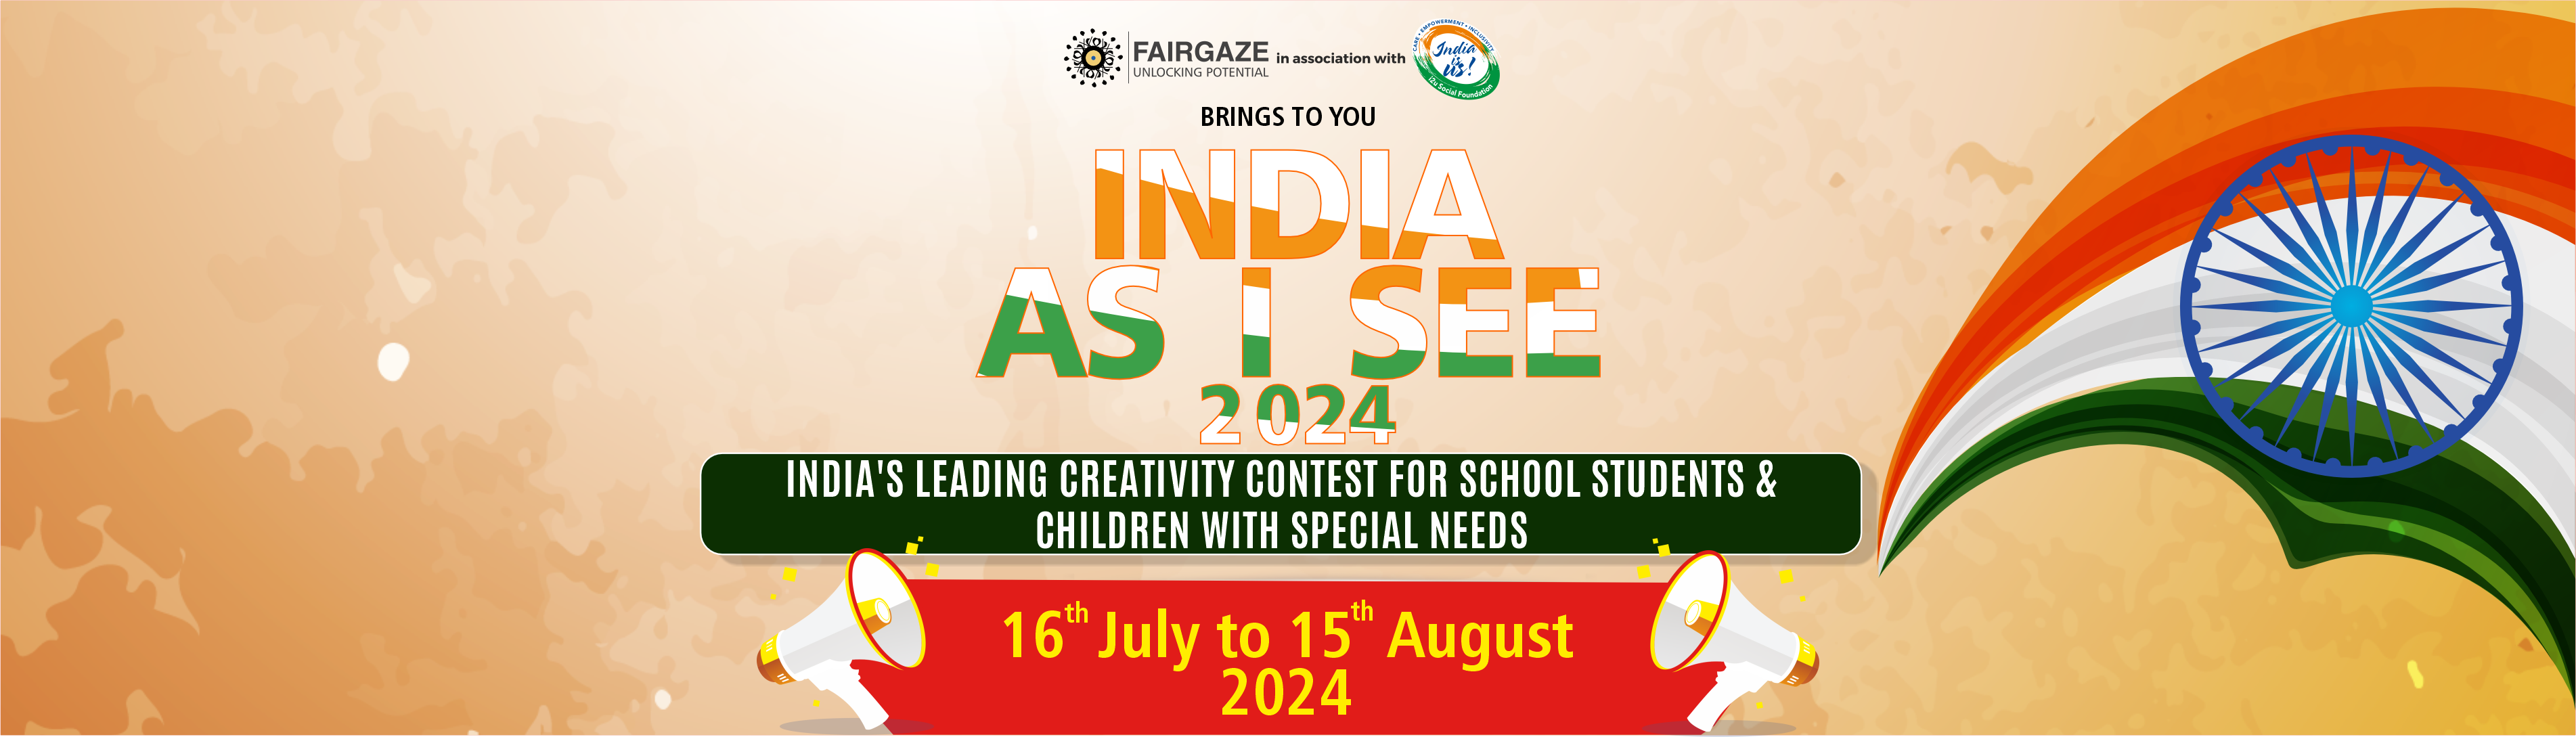 India As I See 2022 Contest for School Students